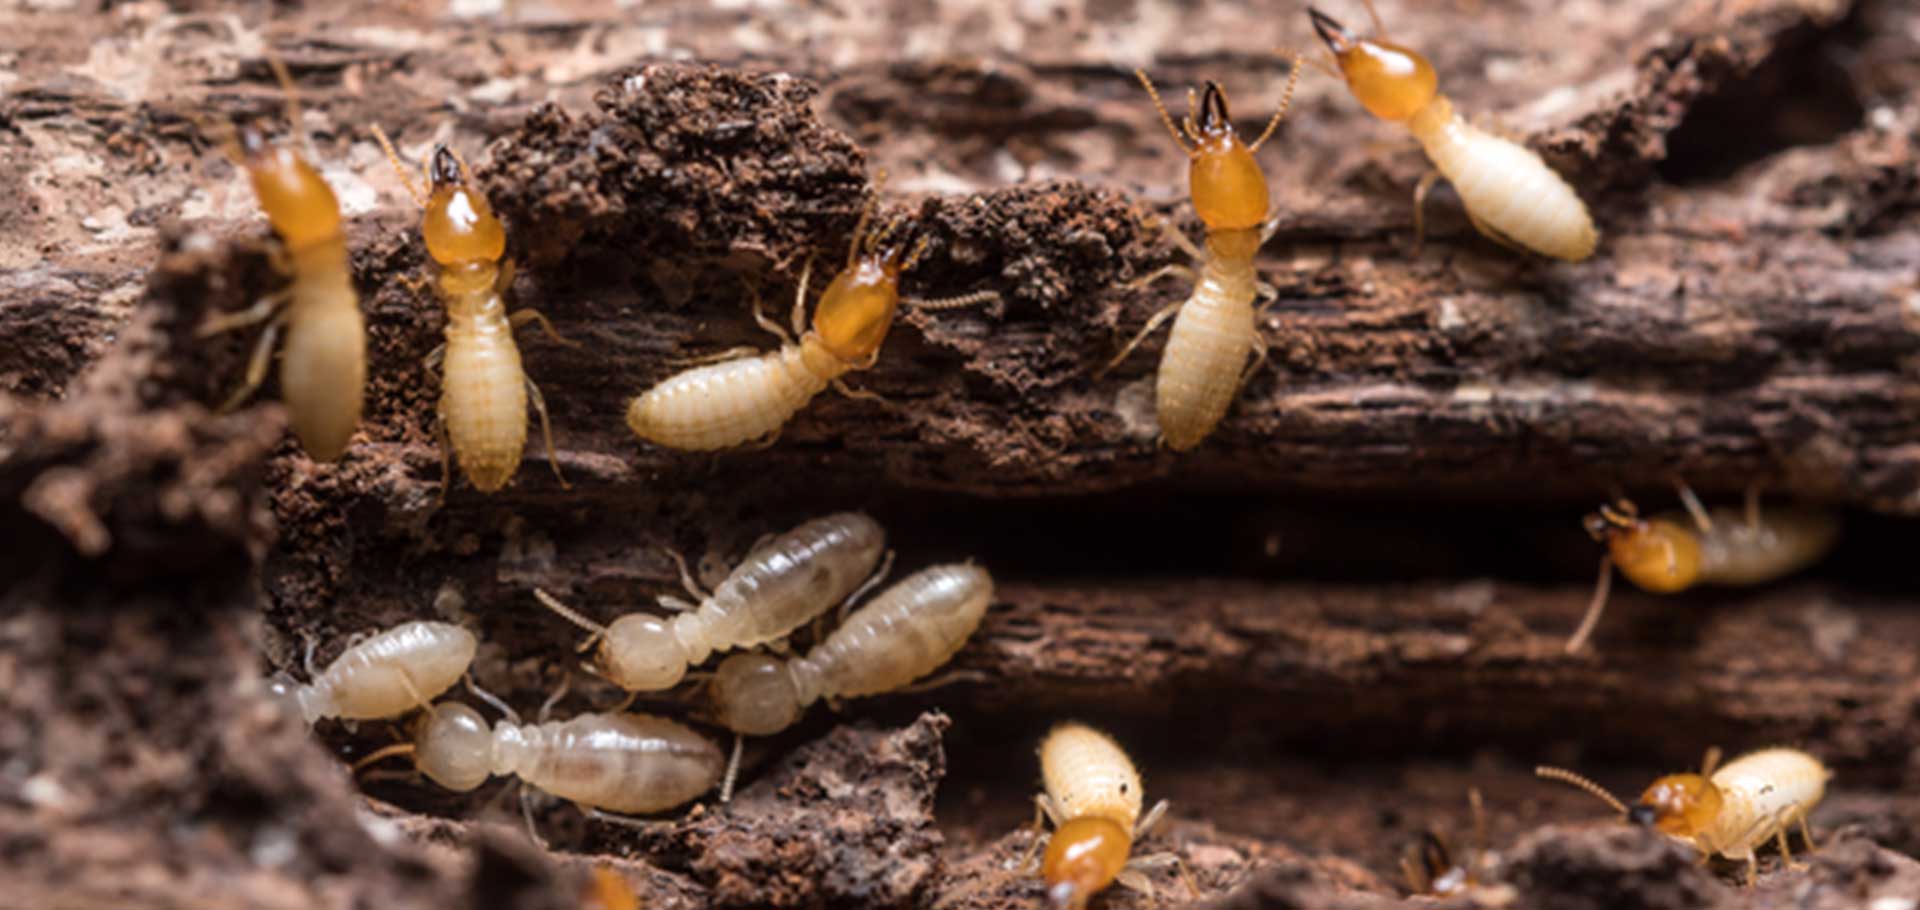 Texas Termite Season & What You Have To Know